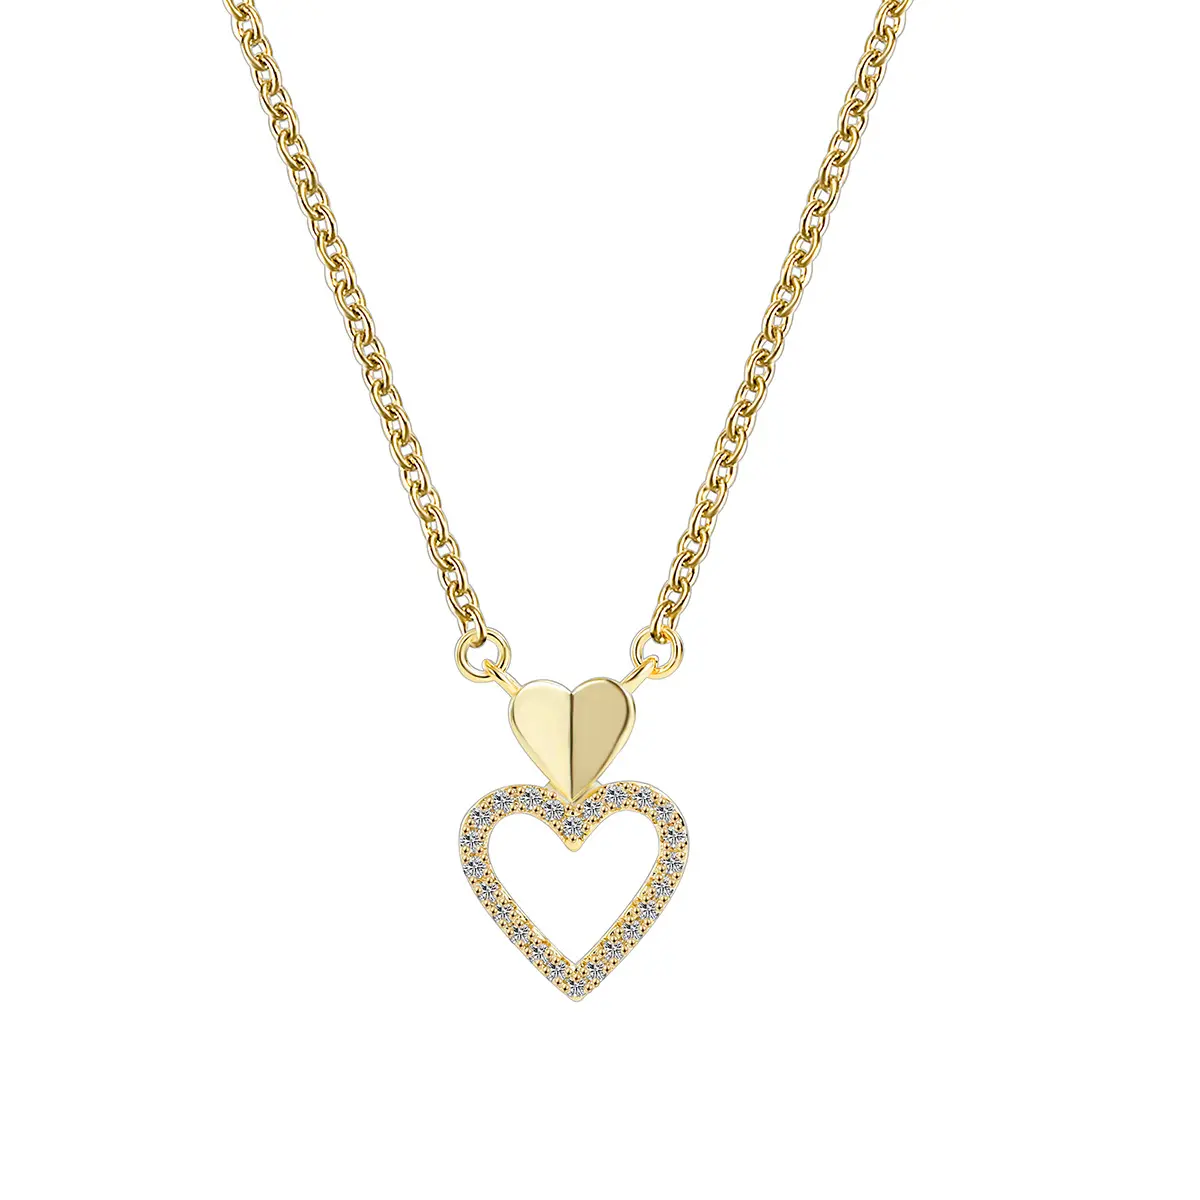 18K Gold Plated Cubic Zirconia Heart Necklace | Cute Dainty Love Pendant Necklaces for Women